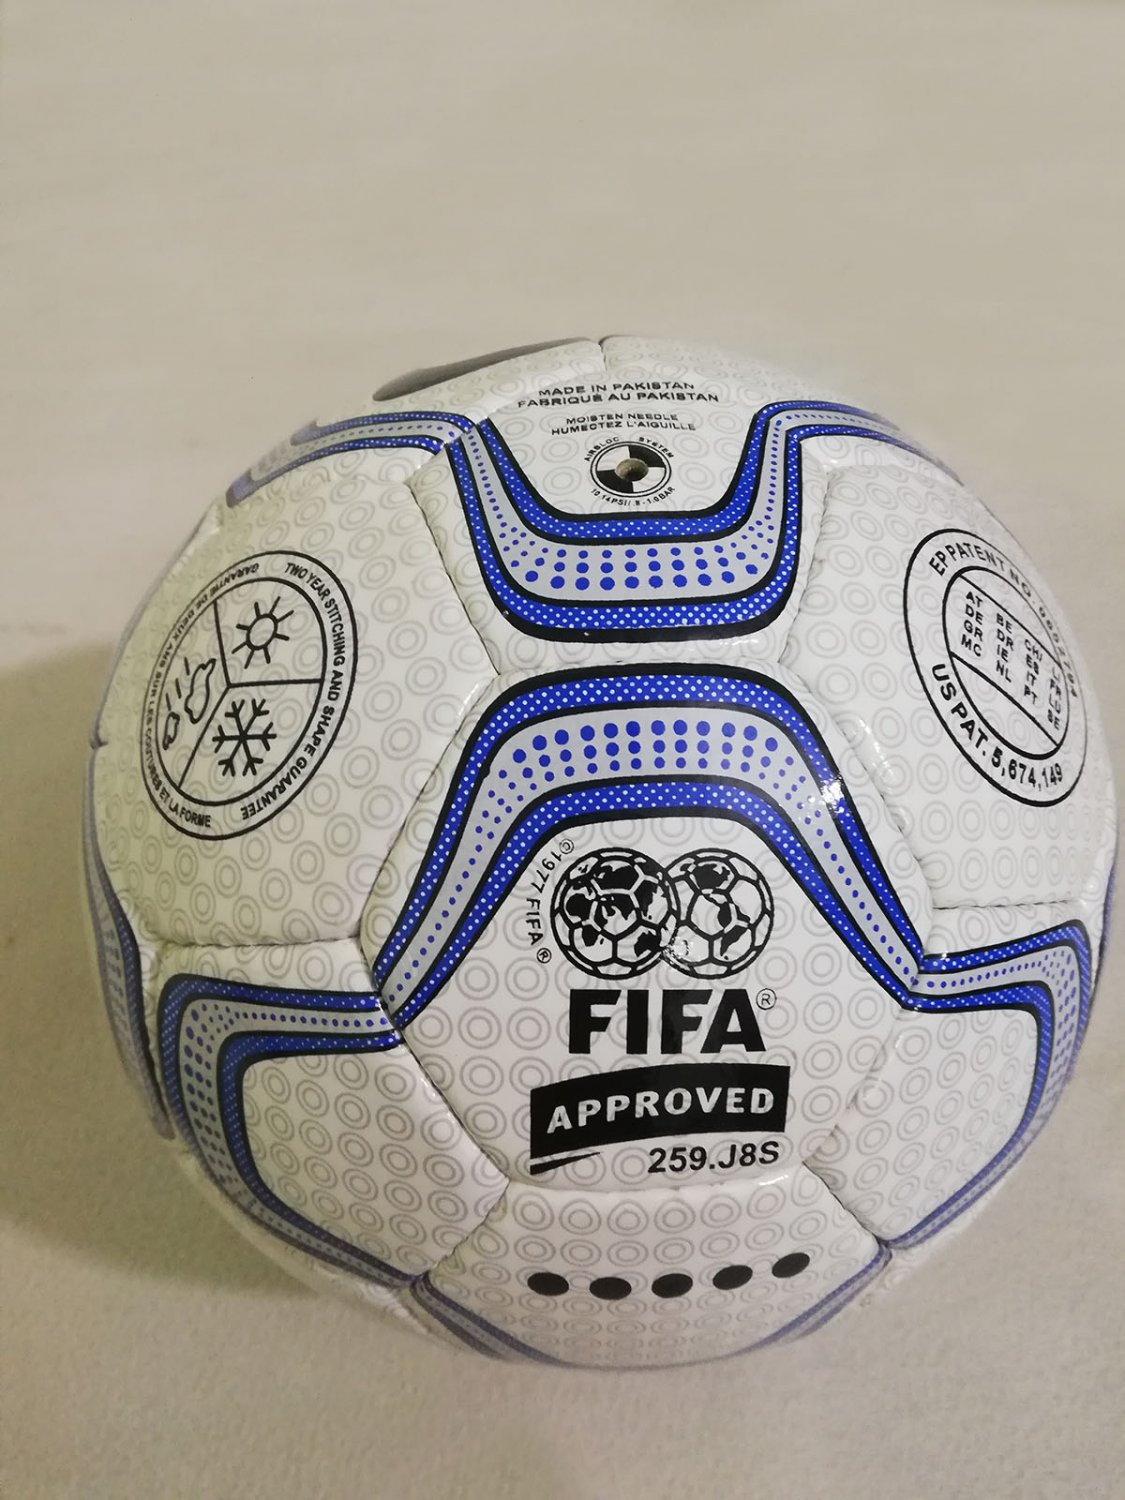 NIKE GEO MERLIN SOCCER BALL FIFA APPROVED FOOTBALL CHAMPIONS LEAGUE